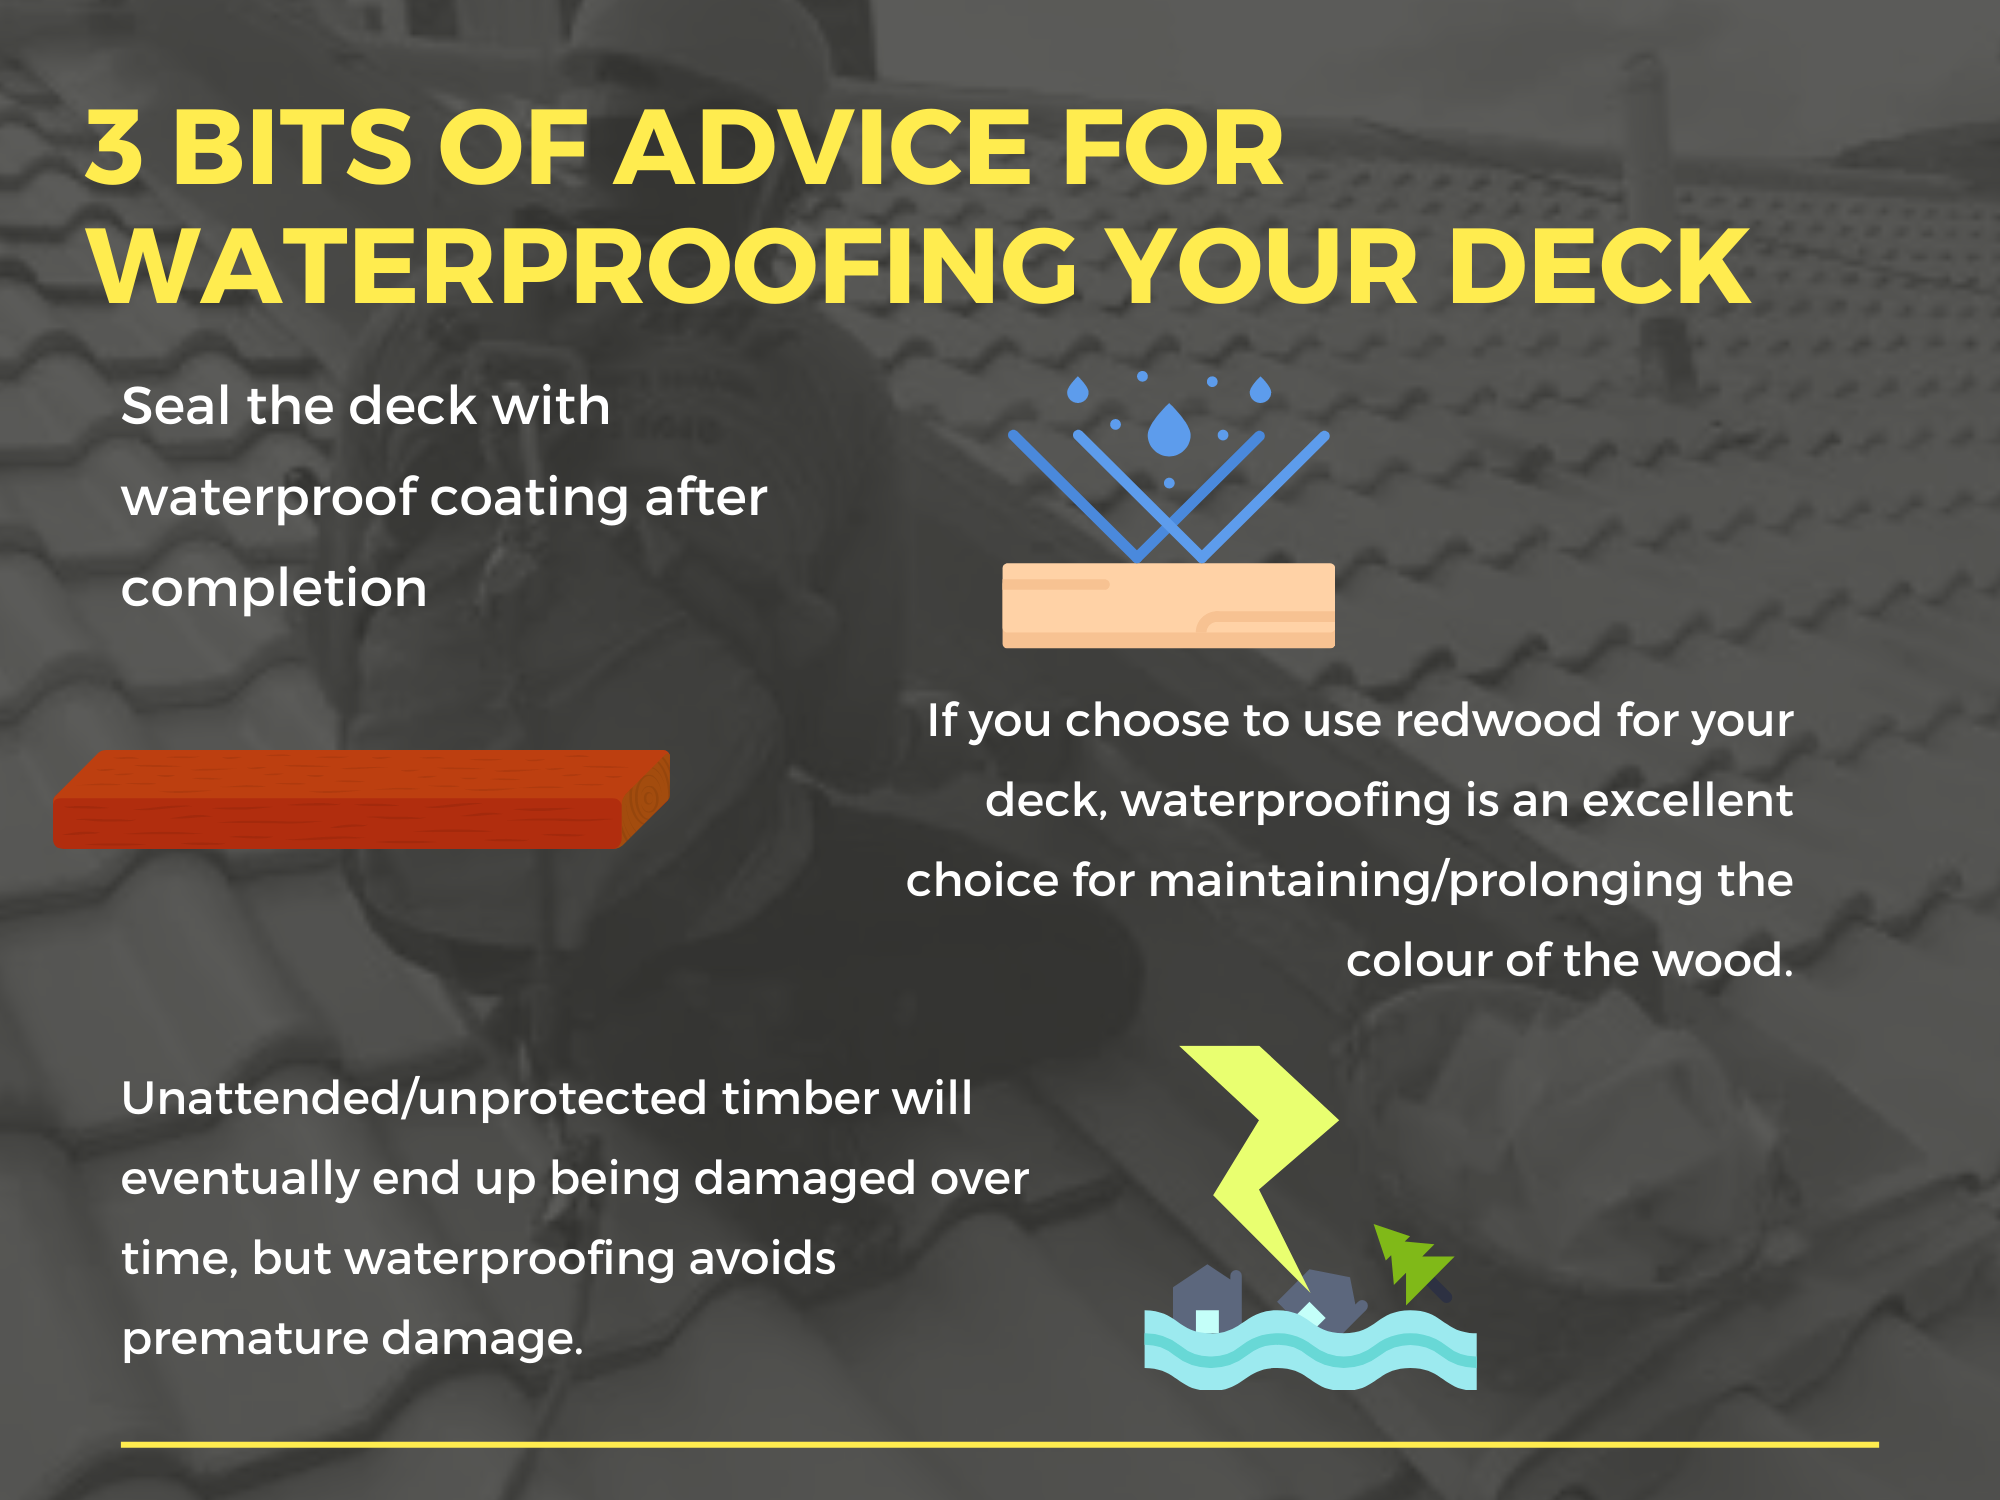 3 Bits Of Advice For Waterproofing Your Deck - Hardware & Construction Blog